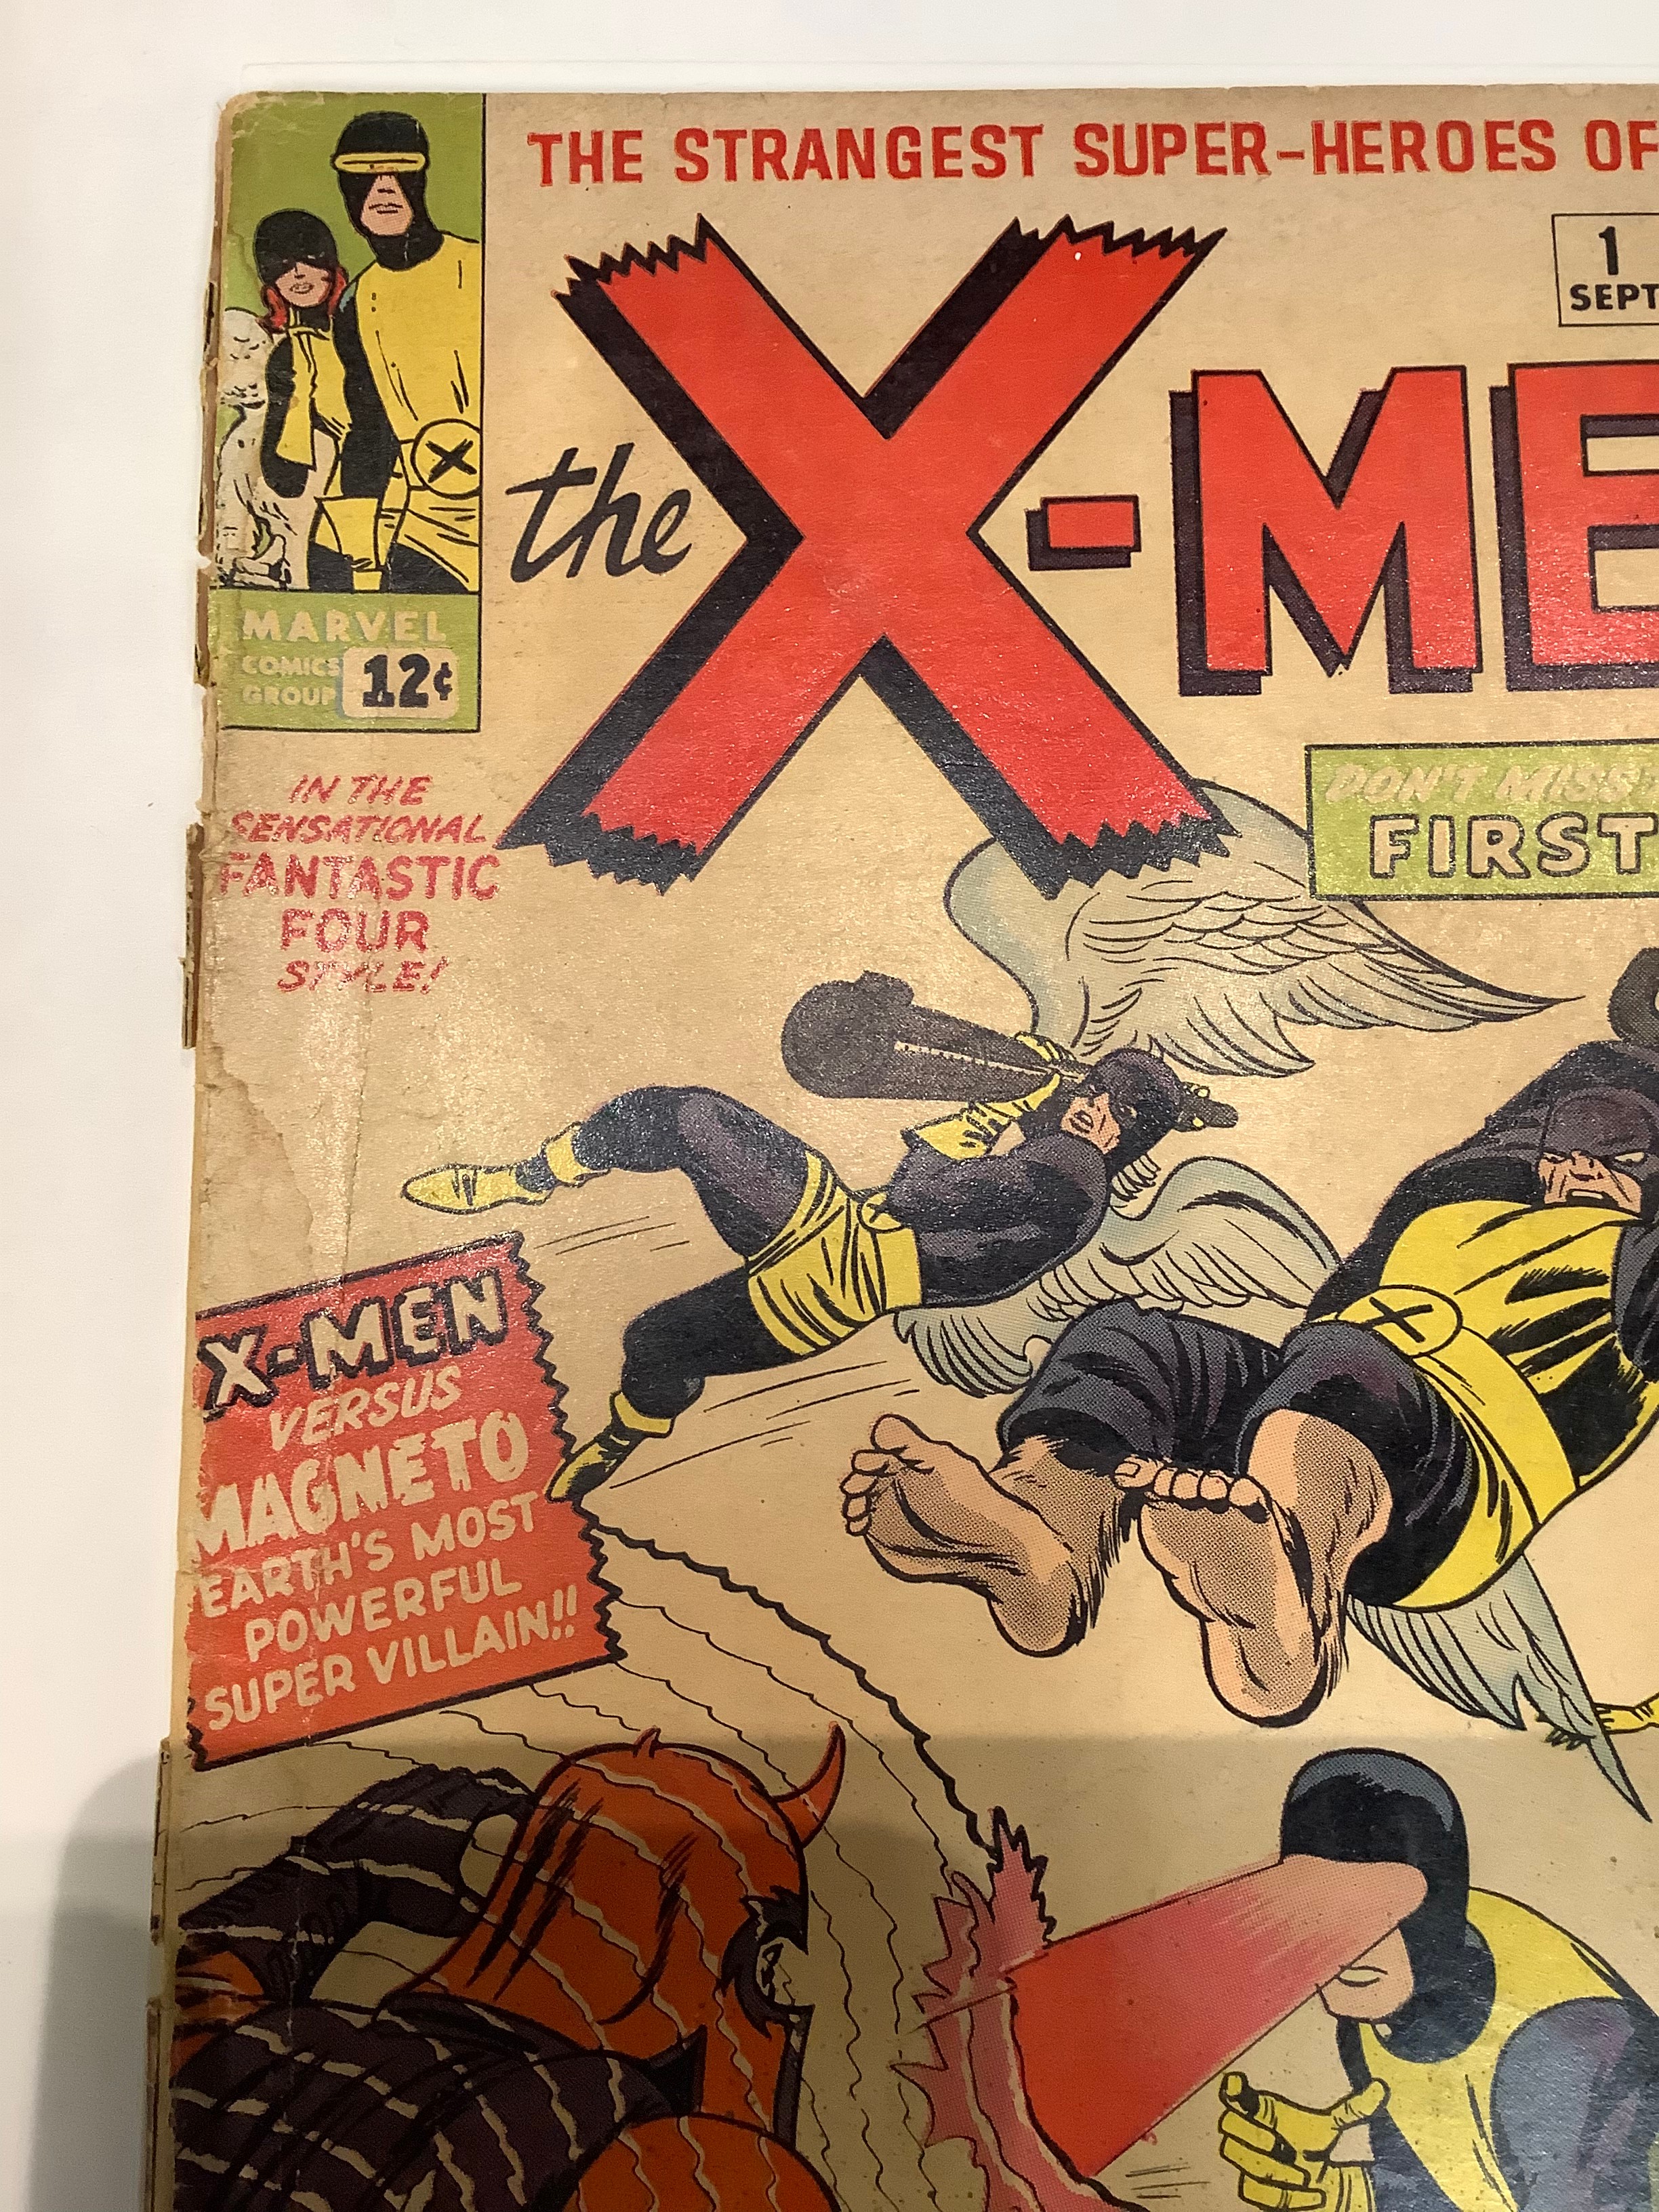 Comics - X-Men #1 (1963). Written by Stan Lee, art by Jack Kirby. Low grade - cover detached. 1st - Image 5 of 6